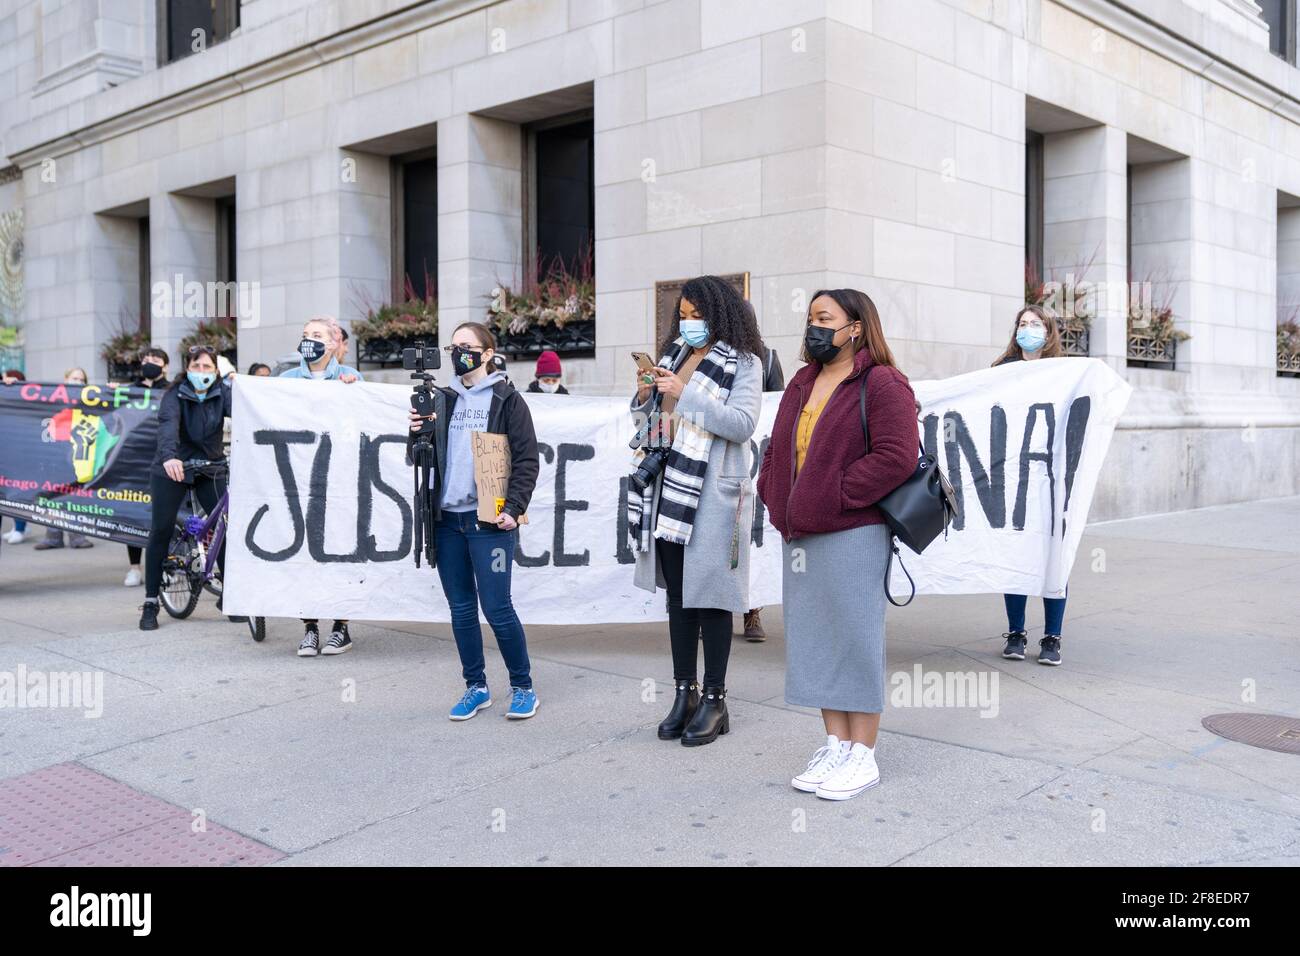 Chicago, Illinois - March 13, 2021: A Group of Peaceful Breonna Taylor Protesters Demand Justice in Downtown Chicago During the COVID-19 Pandemic. Stock Photo